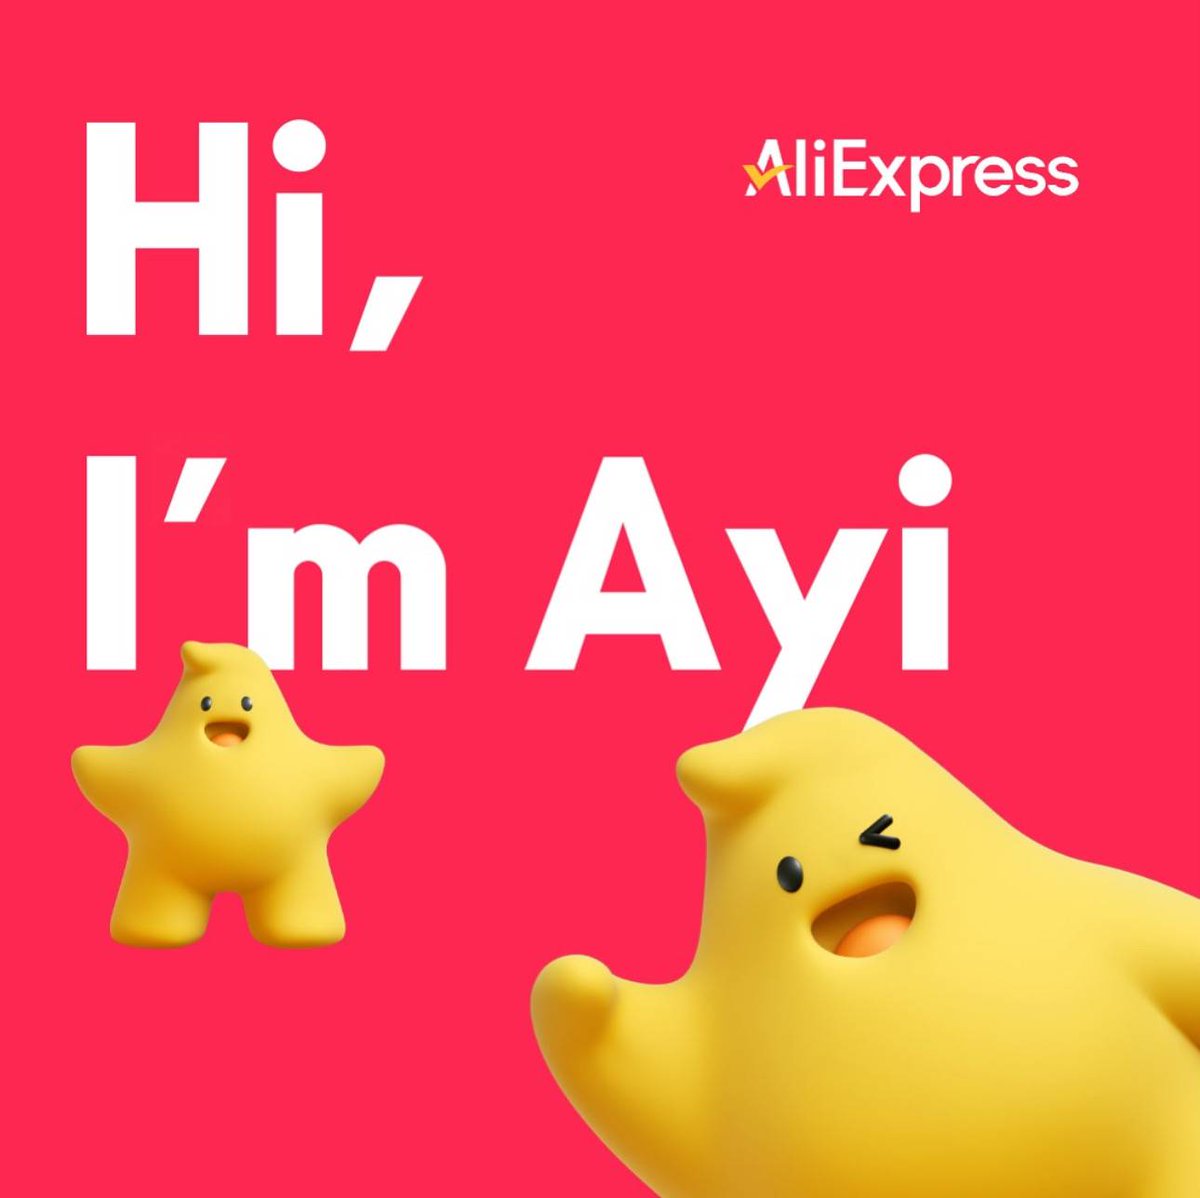 Hi Everyone! I'm Ayi! 🌟 I'm so excited to chat with my #AliExpressers! Send me a message and say hello! 👋